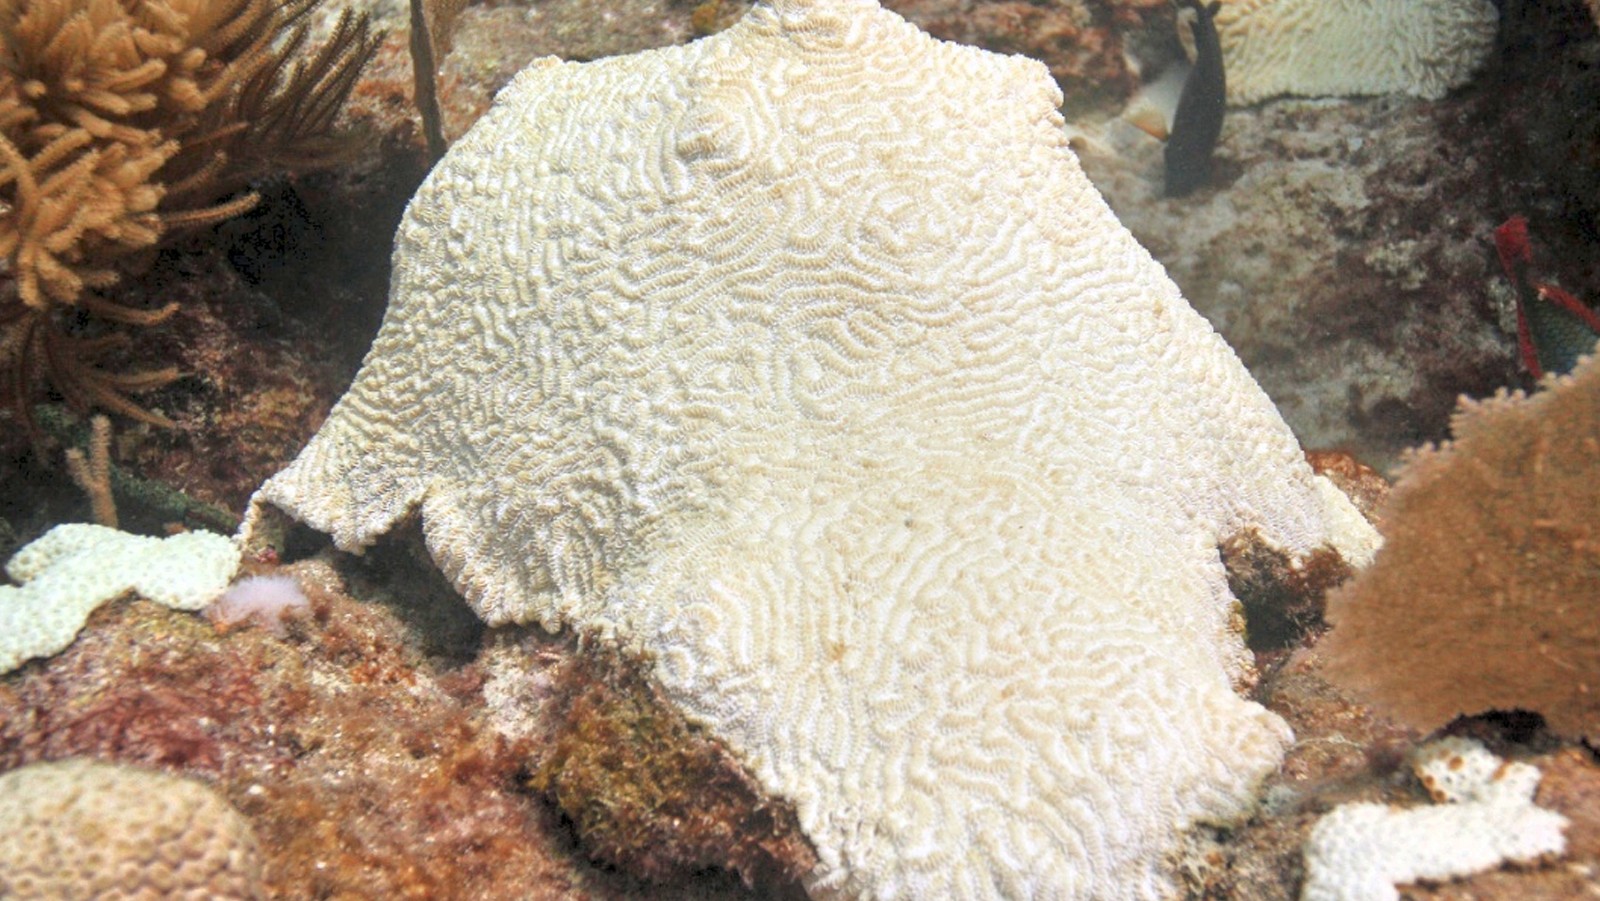 Bleached colony of Meandrina meandrites at Emerald Reef, Key Biscayne, FL. Image credit: NOAA